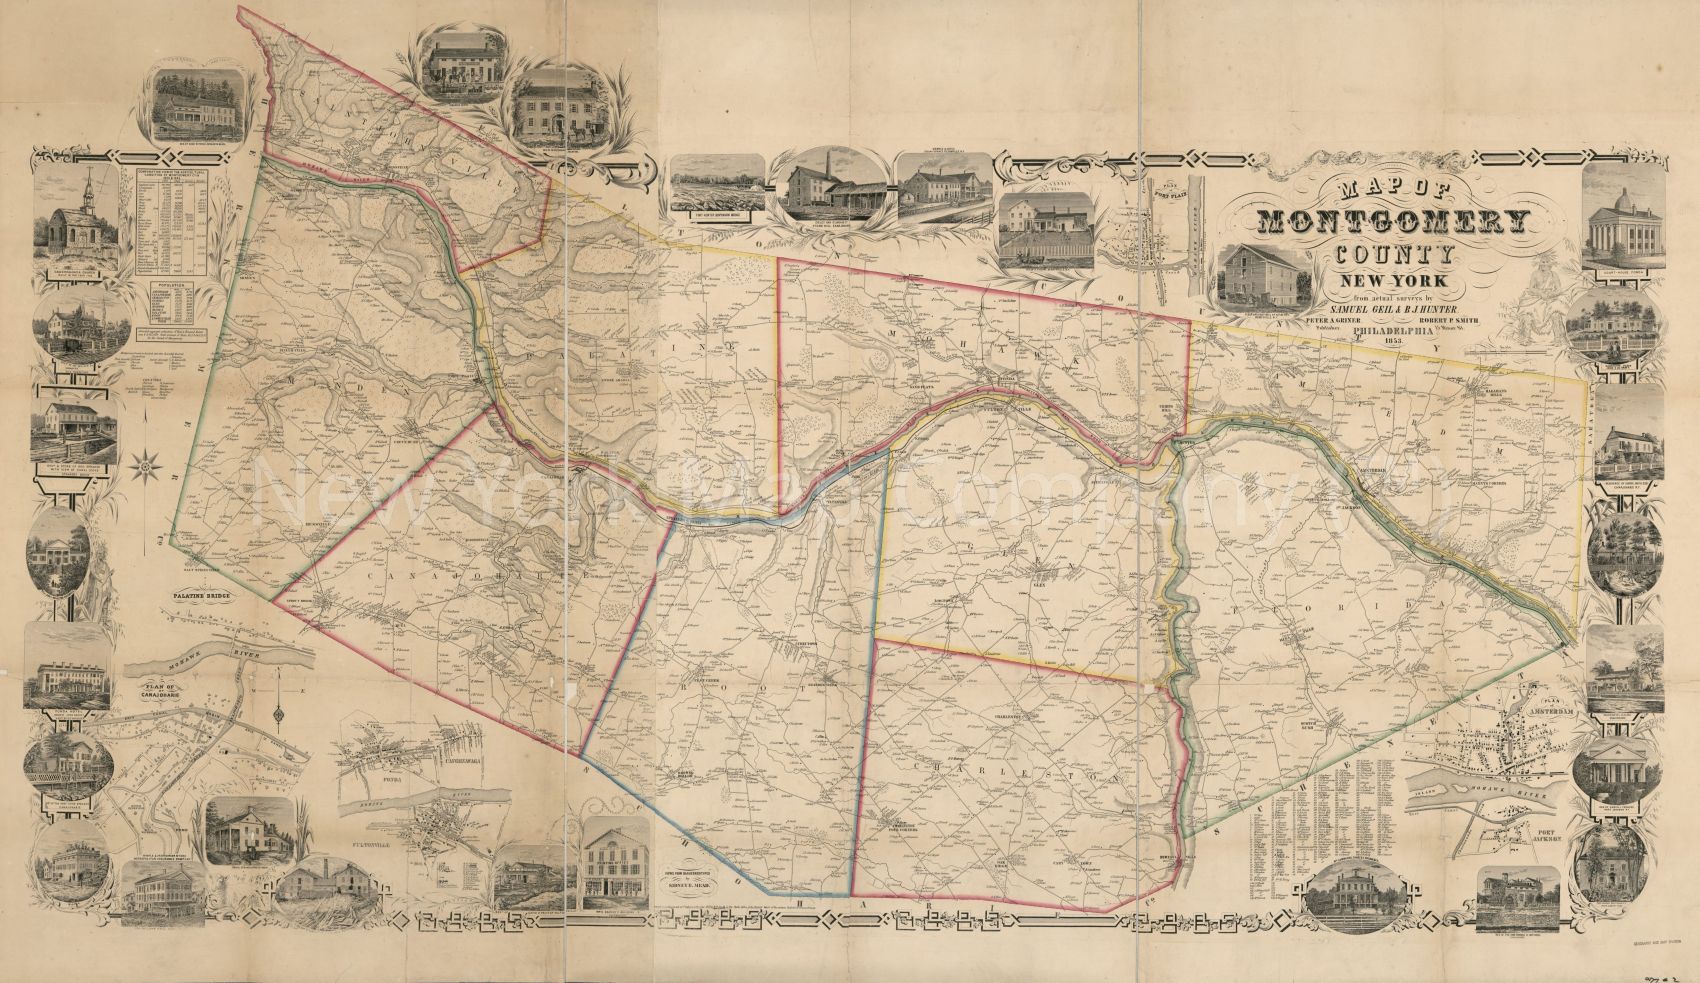 1853 Map Map Of Montgomery County New York From Actual Surveys